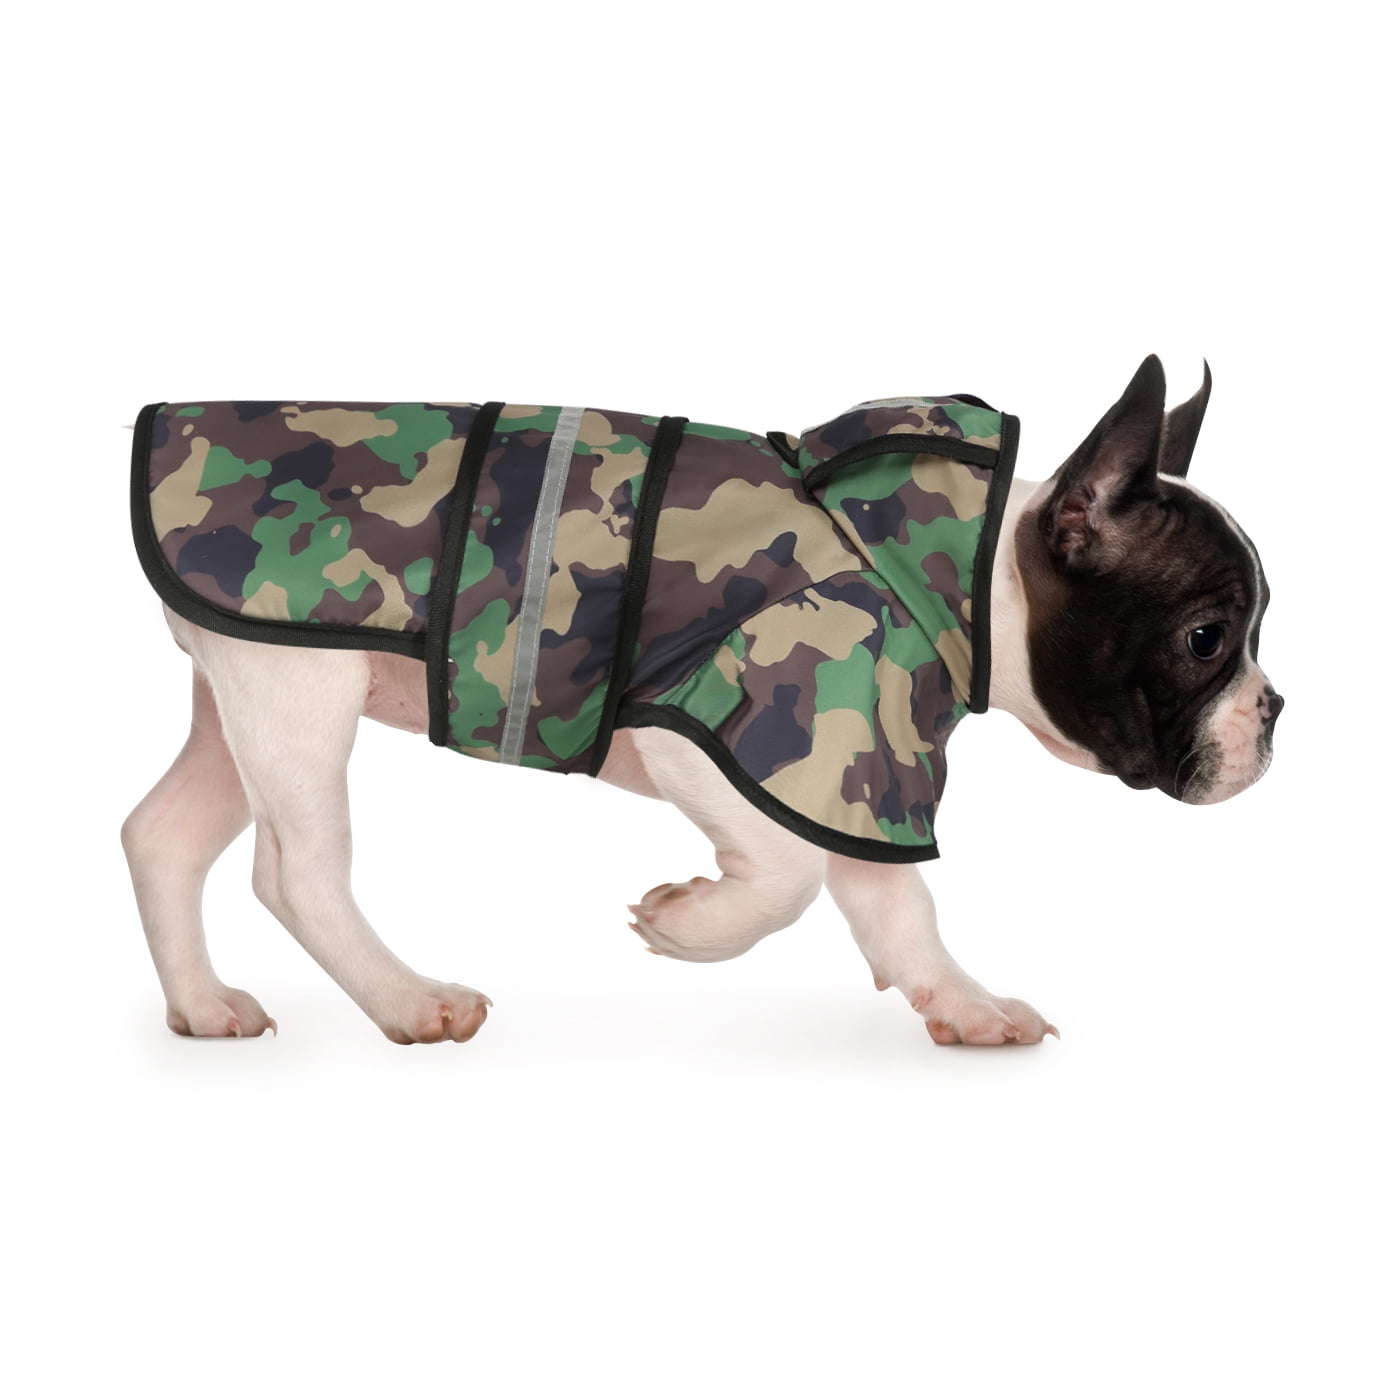 Green Camo Dog Hoodie Camouflage Pet Clothes Sweatshirts Cold Weather Coat Fleece Hooded Sweater for Small Medium Large Boy Dogs Cats Puppy Autumn Winter （2XL 